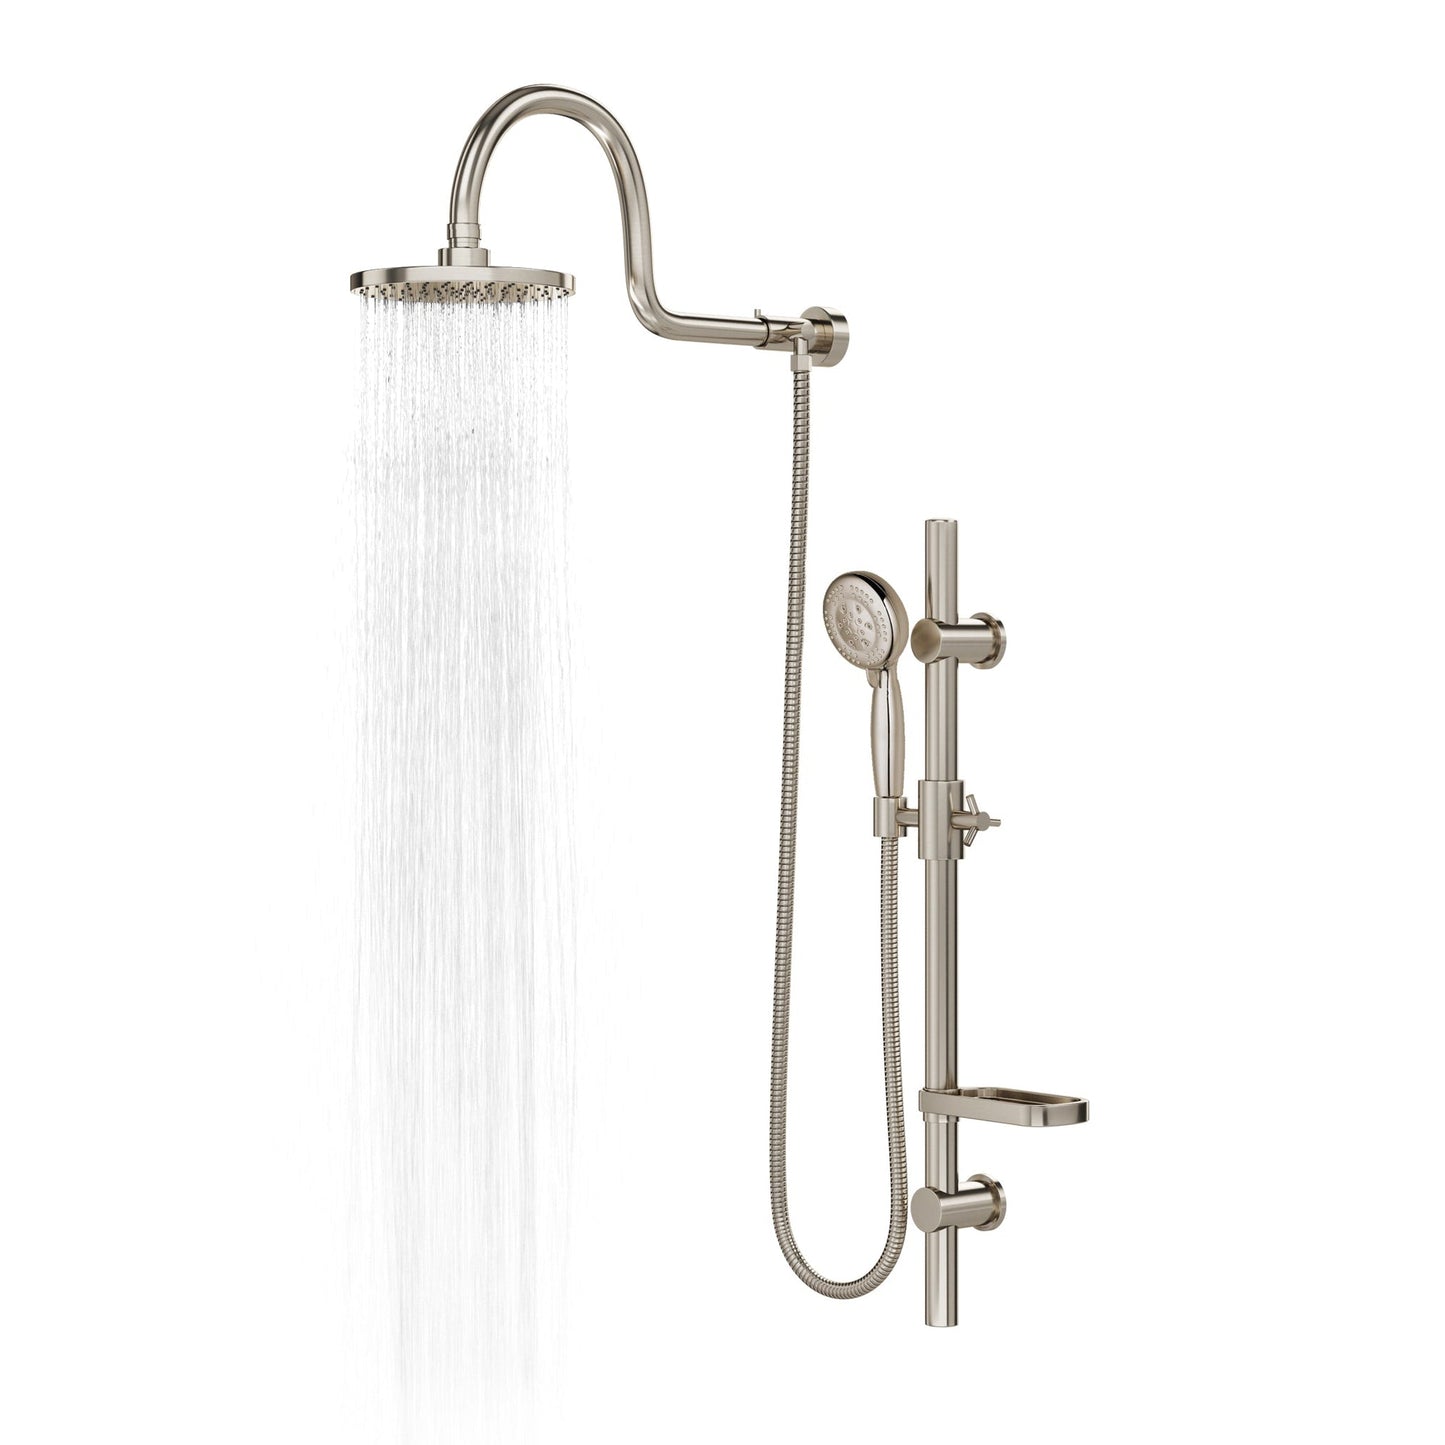 PULSE ShowerSpas AquaRain 2.5 GPM Shower System in Brushed Nickel Finish With Rain Shower Head and 5-Function Handheld Shower